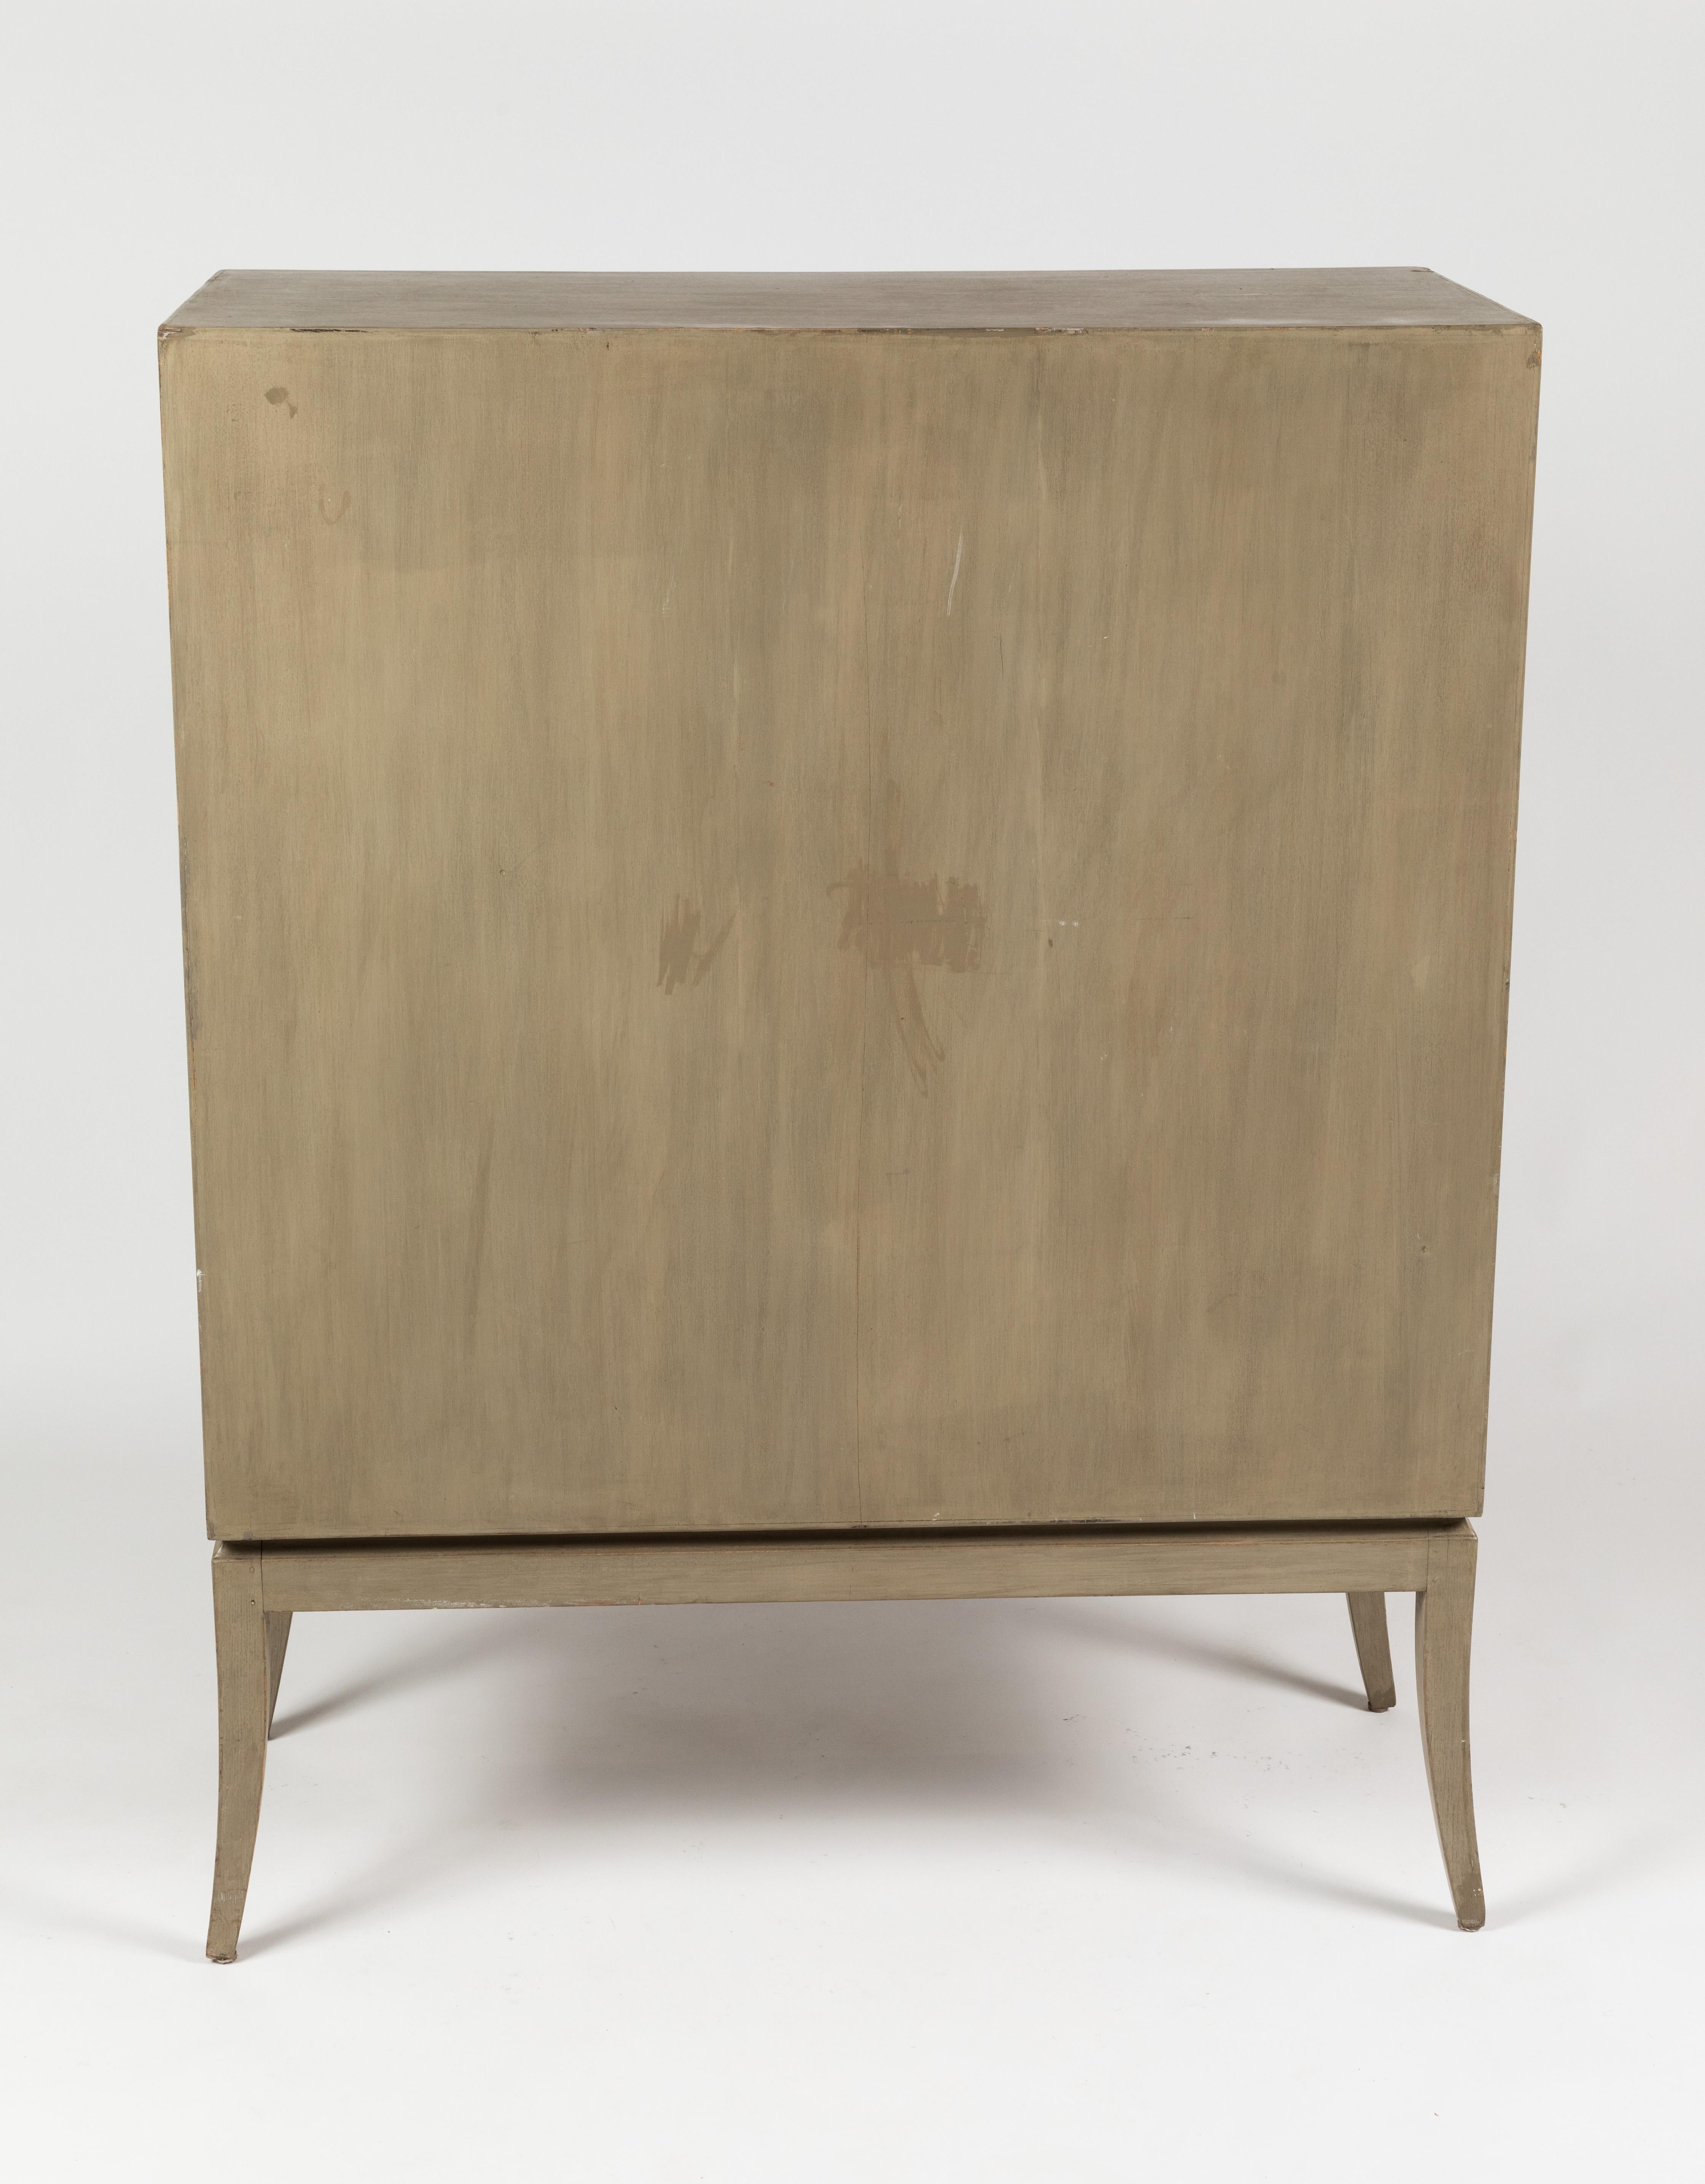 Rare Tommi Parzinger highboy featuring the original greyed wood finish along with the handmade polished brass hardware. This is part of the original collection released by Charak Modern as part of Mr. Parzinger's first collection. Charak was a